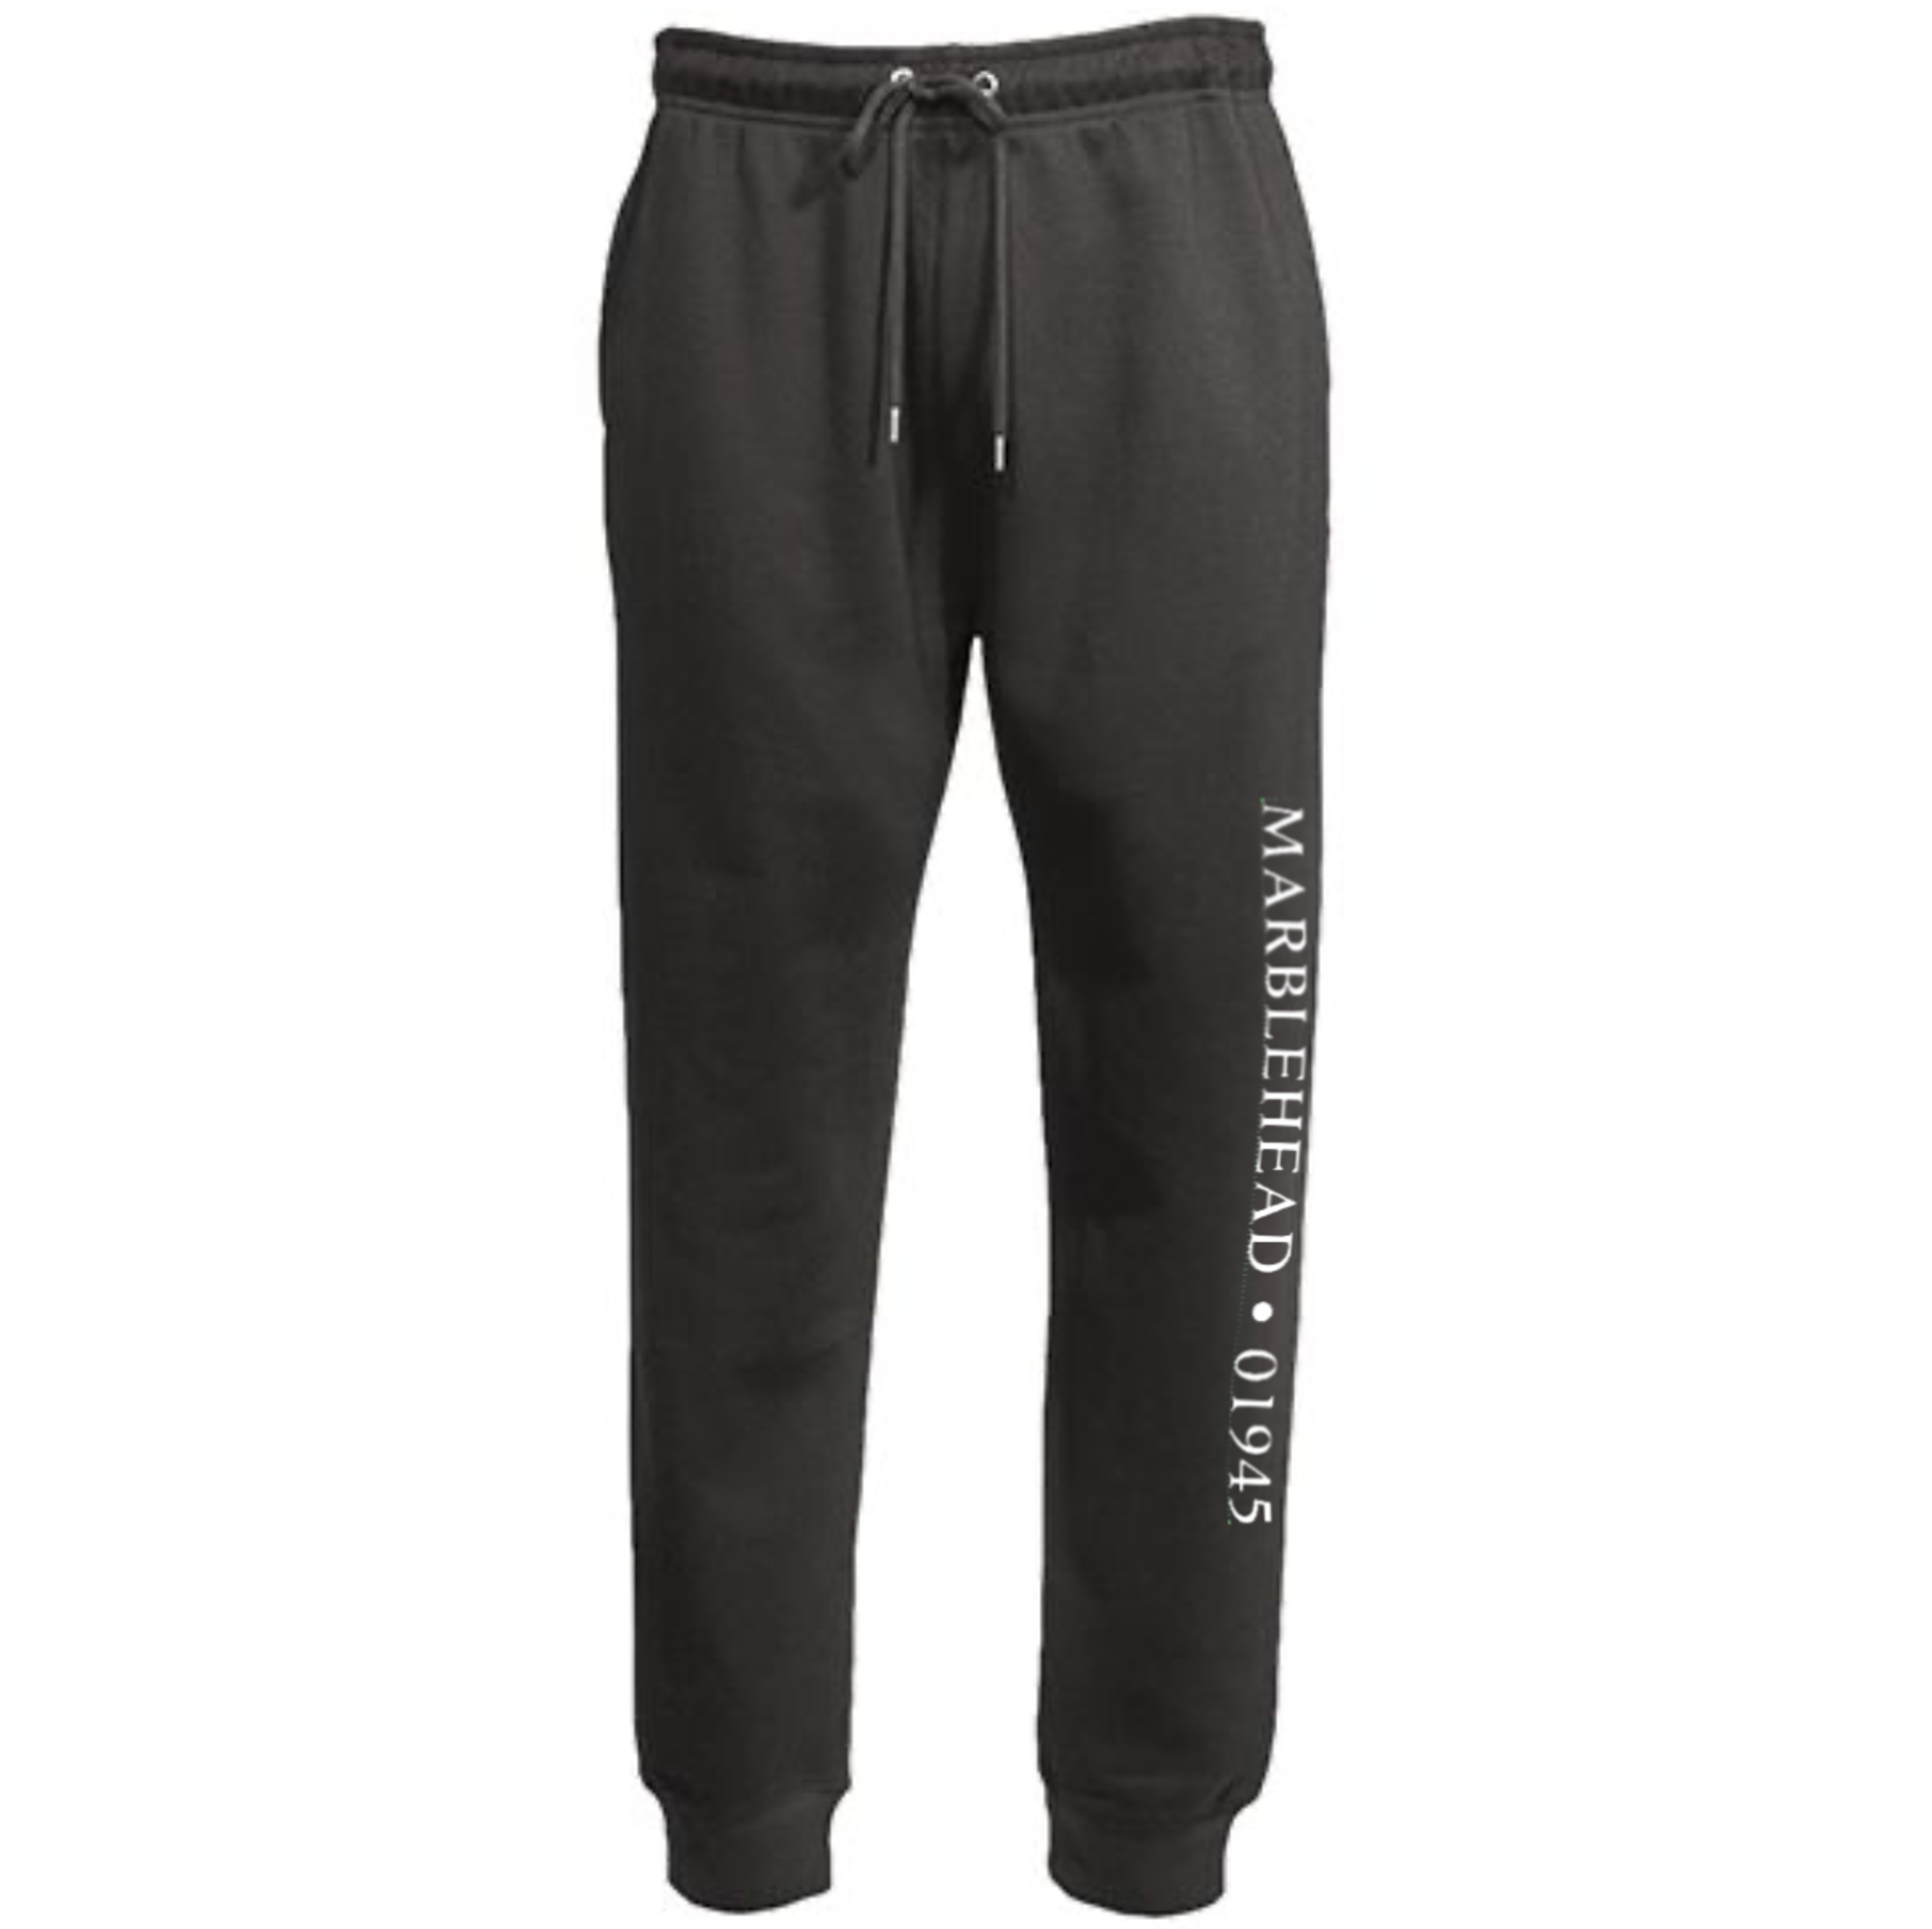 Marblehead Locale Classic Joggers